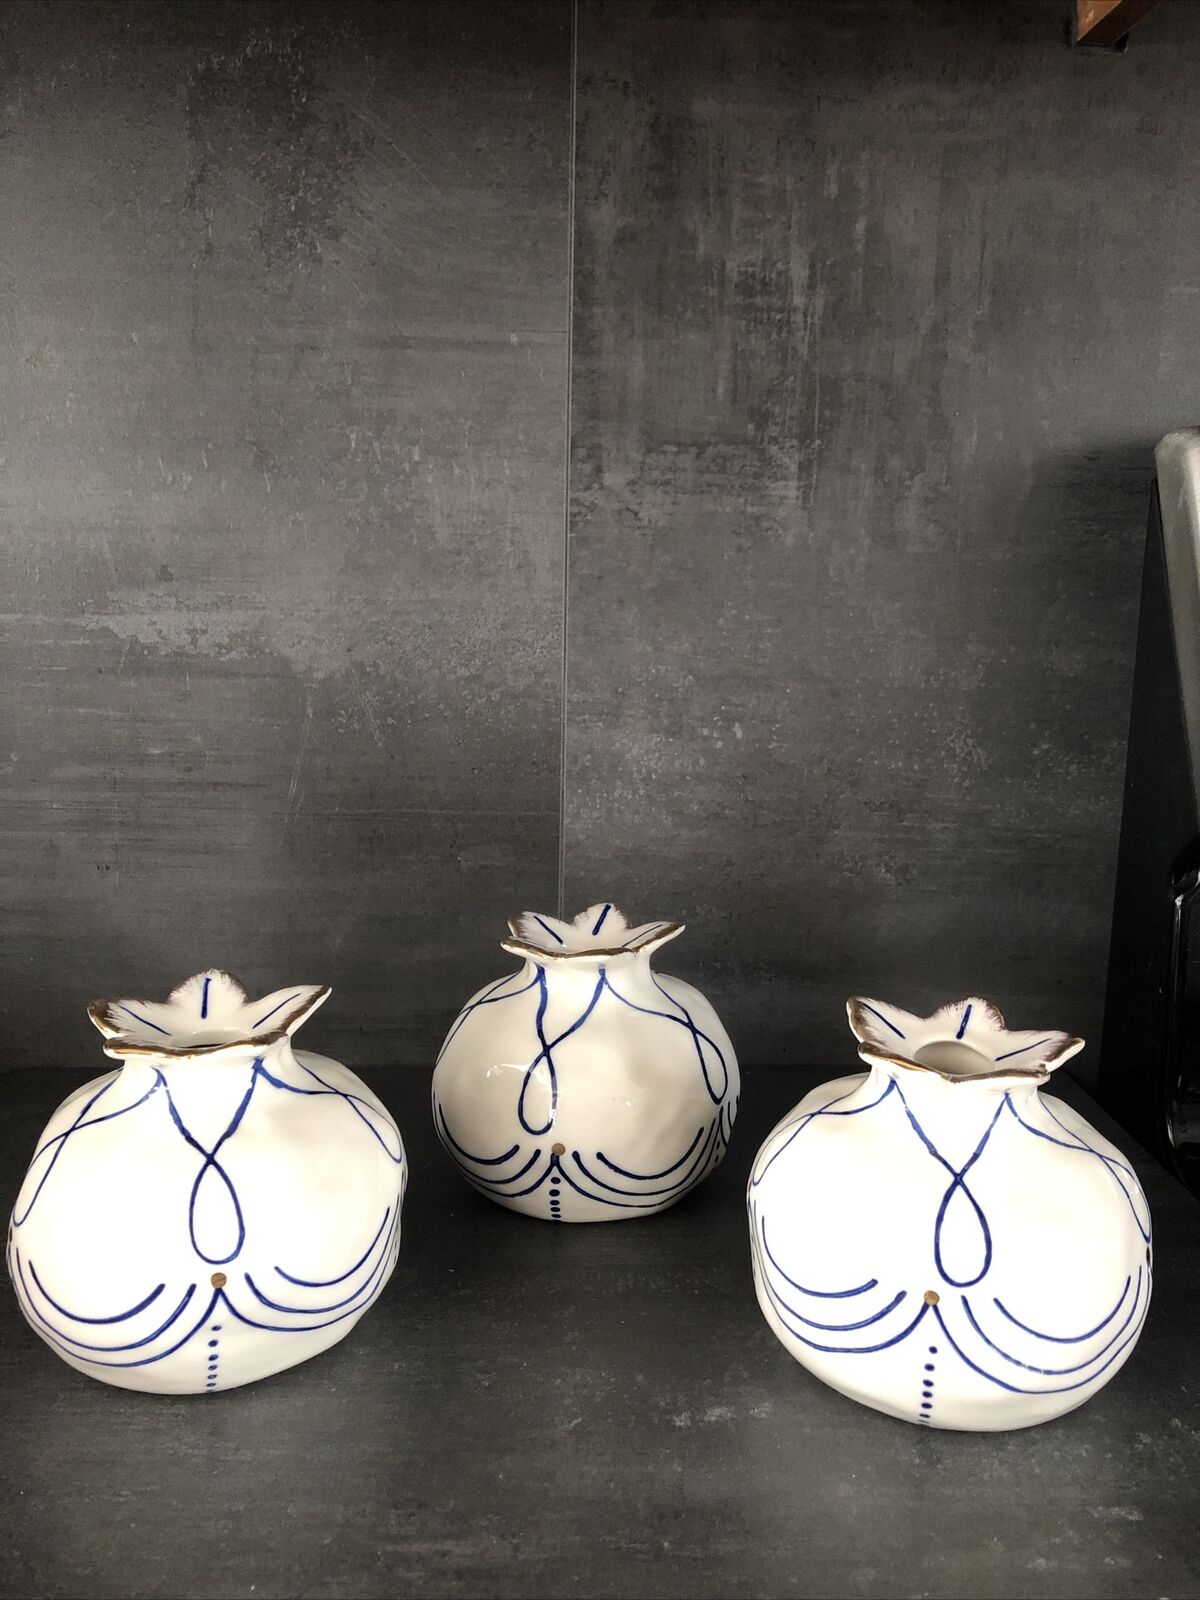 Three White Bud Vases In Pomegranate Shape 4” W With Blue Swirls & Gold Accents